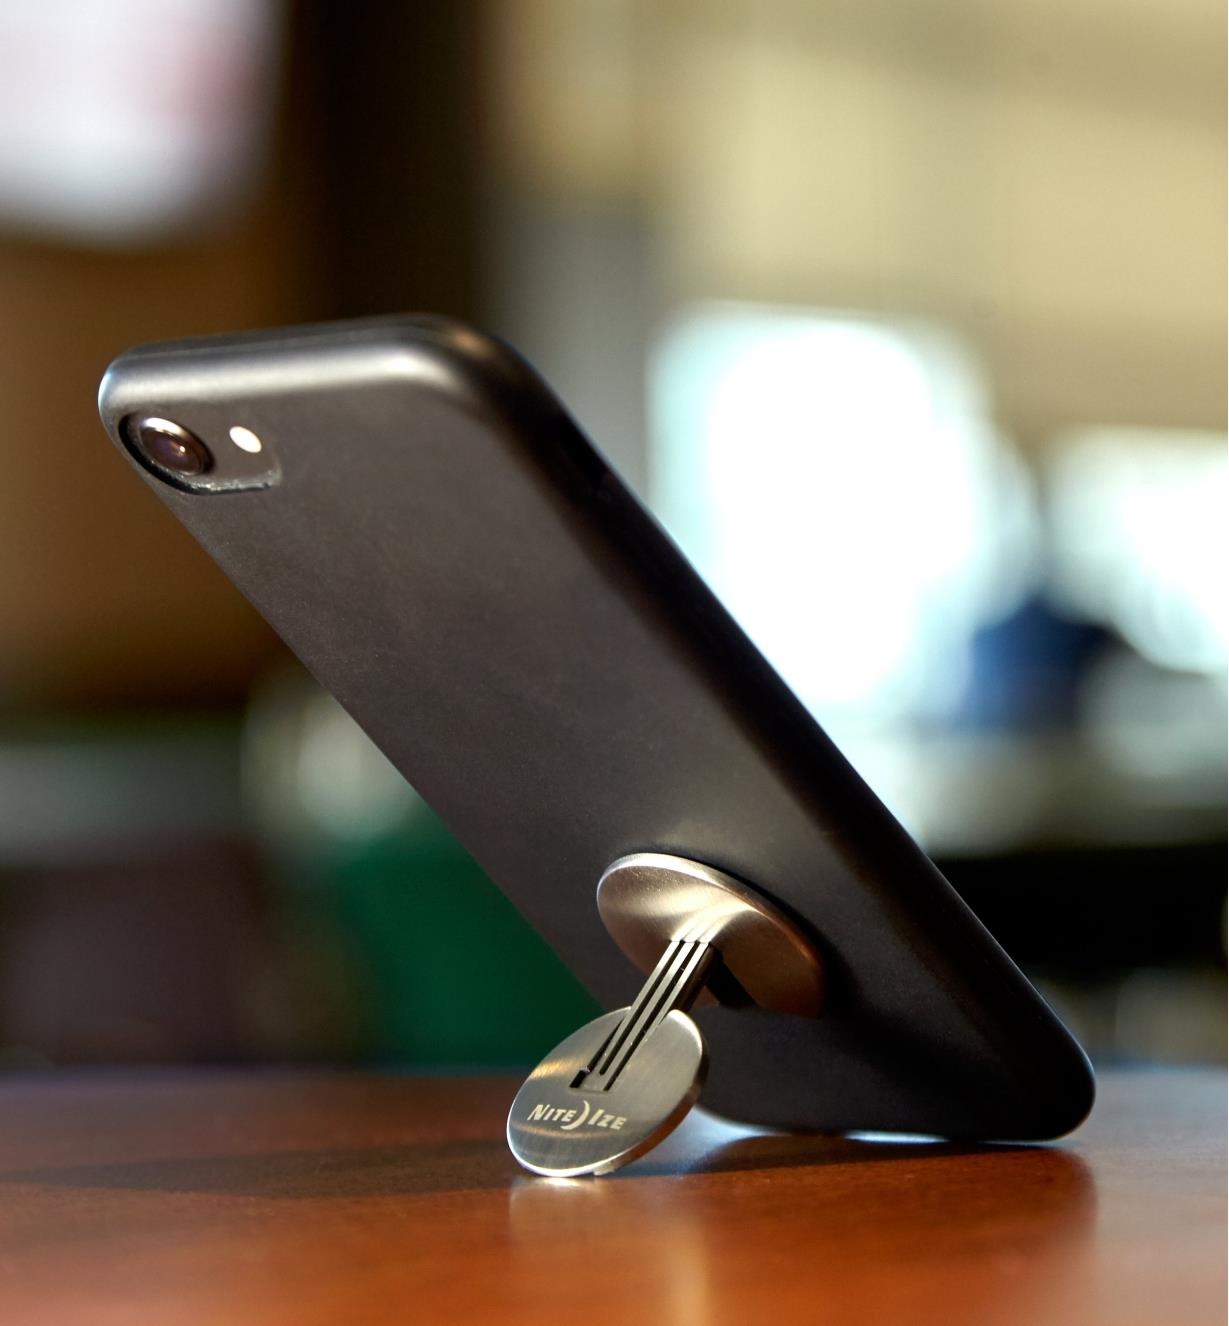 Nite Ize FlipOut Handle & Stand attached to a phone, folded out to prop the phone on a tabletop